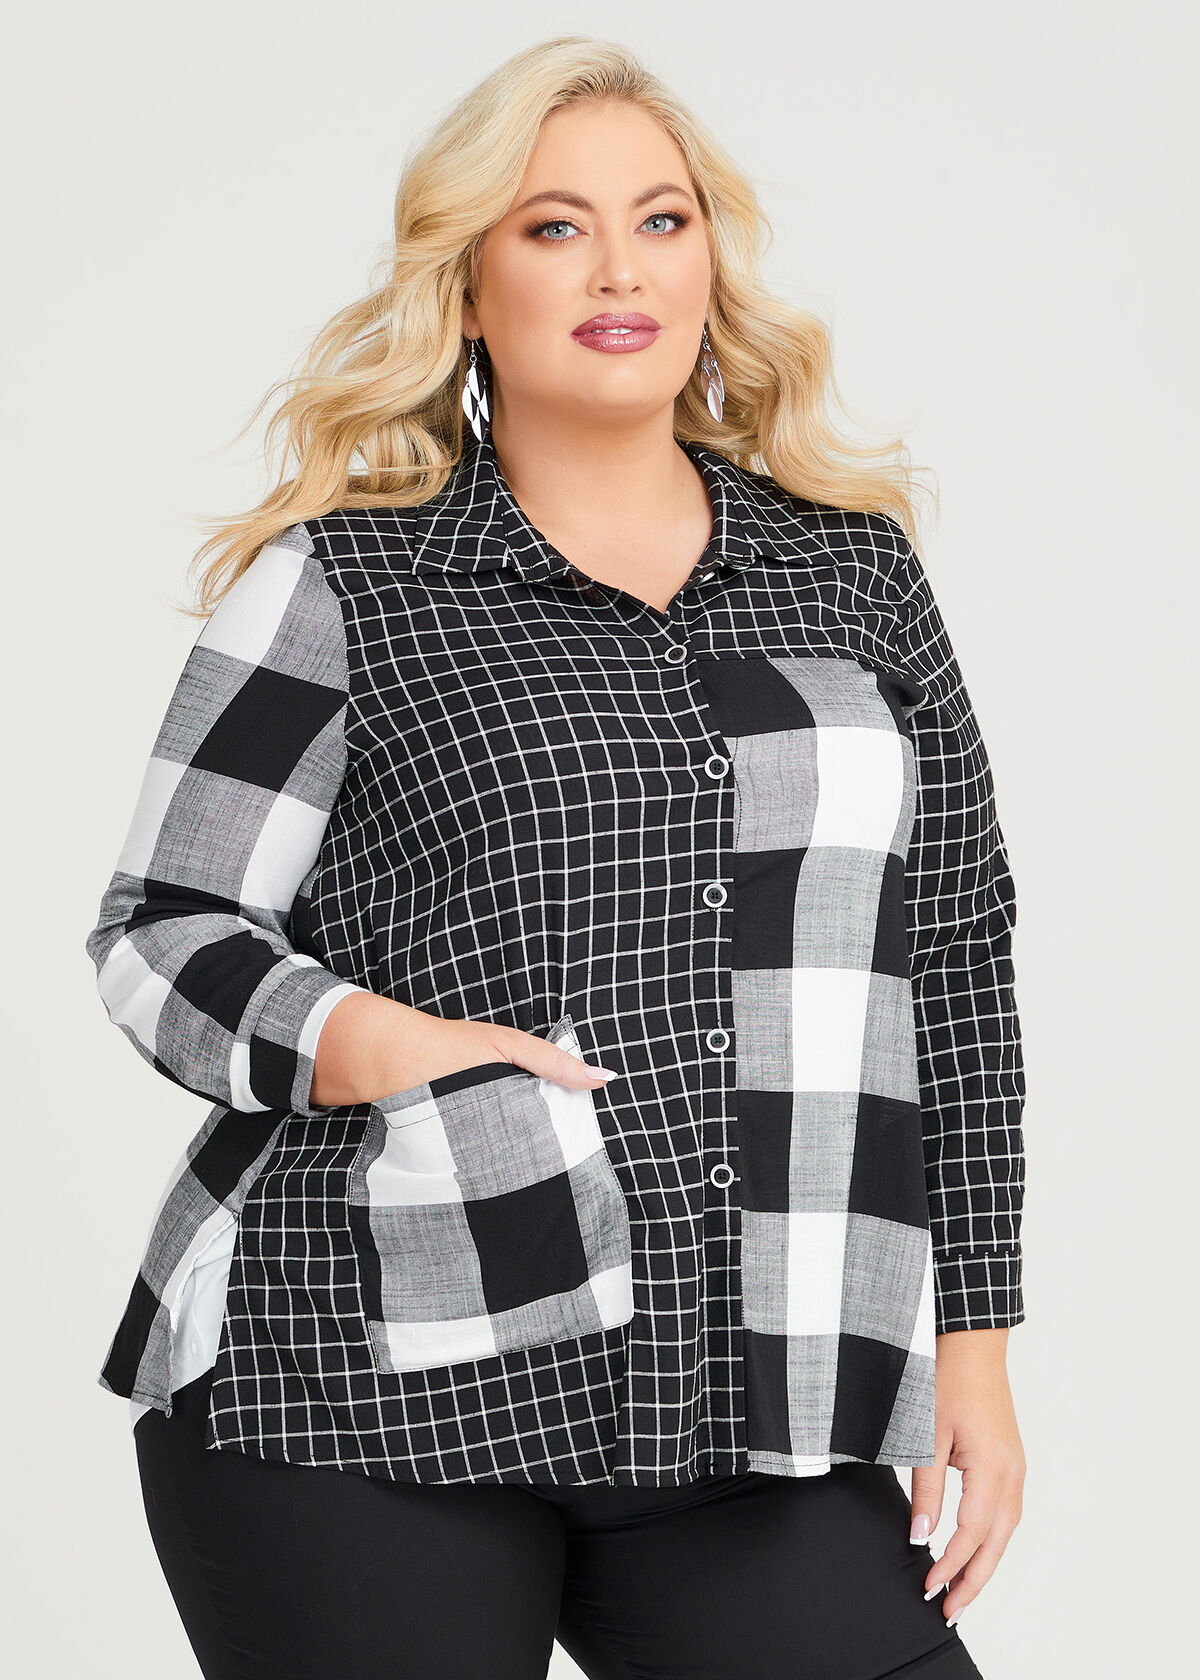 Plus Size Outfits With Leggings 5 best - curvyoutfits.com | Plus size  fashion, Plus size leggings, Plus size outfits